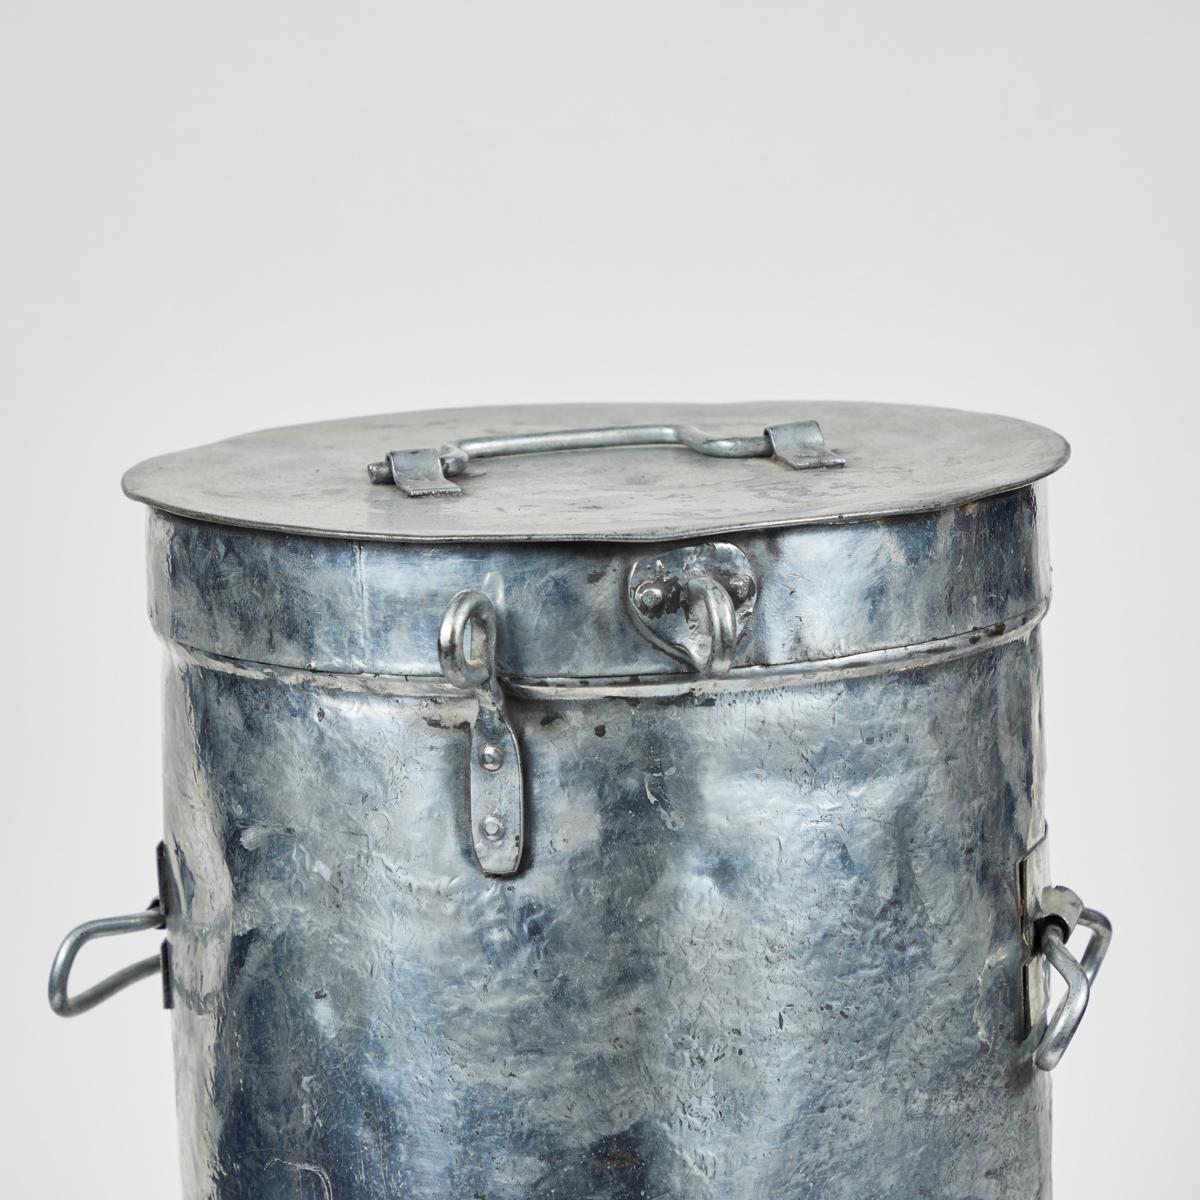 Industrial metal bin from an early 20th-century French candy factory. With its well-patinated chrome-like finish and utilitarian hardware, this piece makes a chic and ironic receptacle for waste, but may also easily be converted for use as a